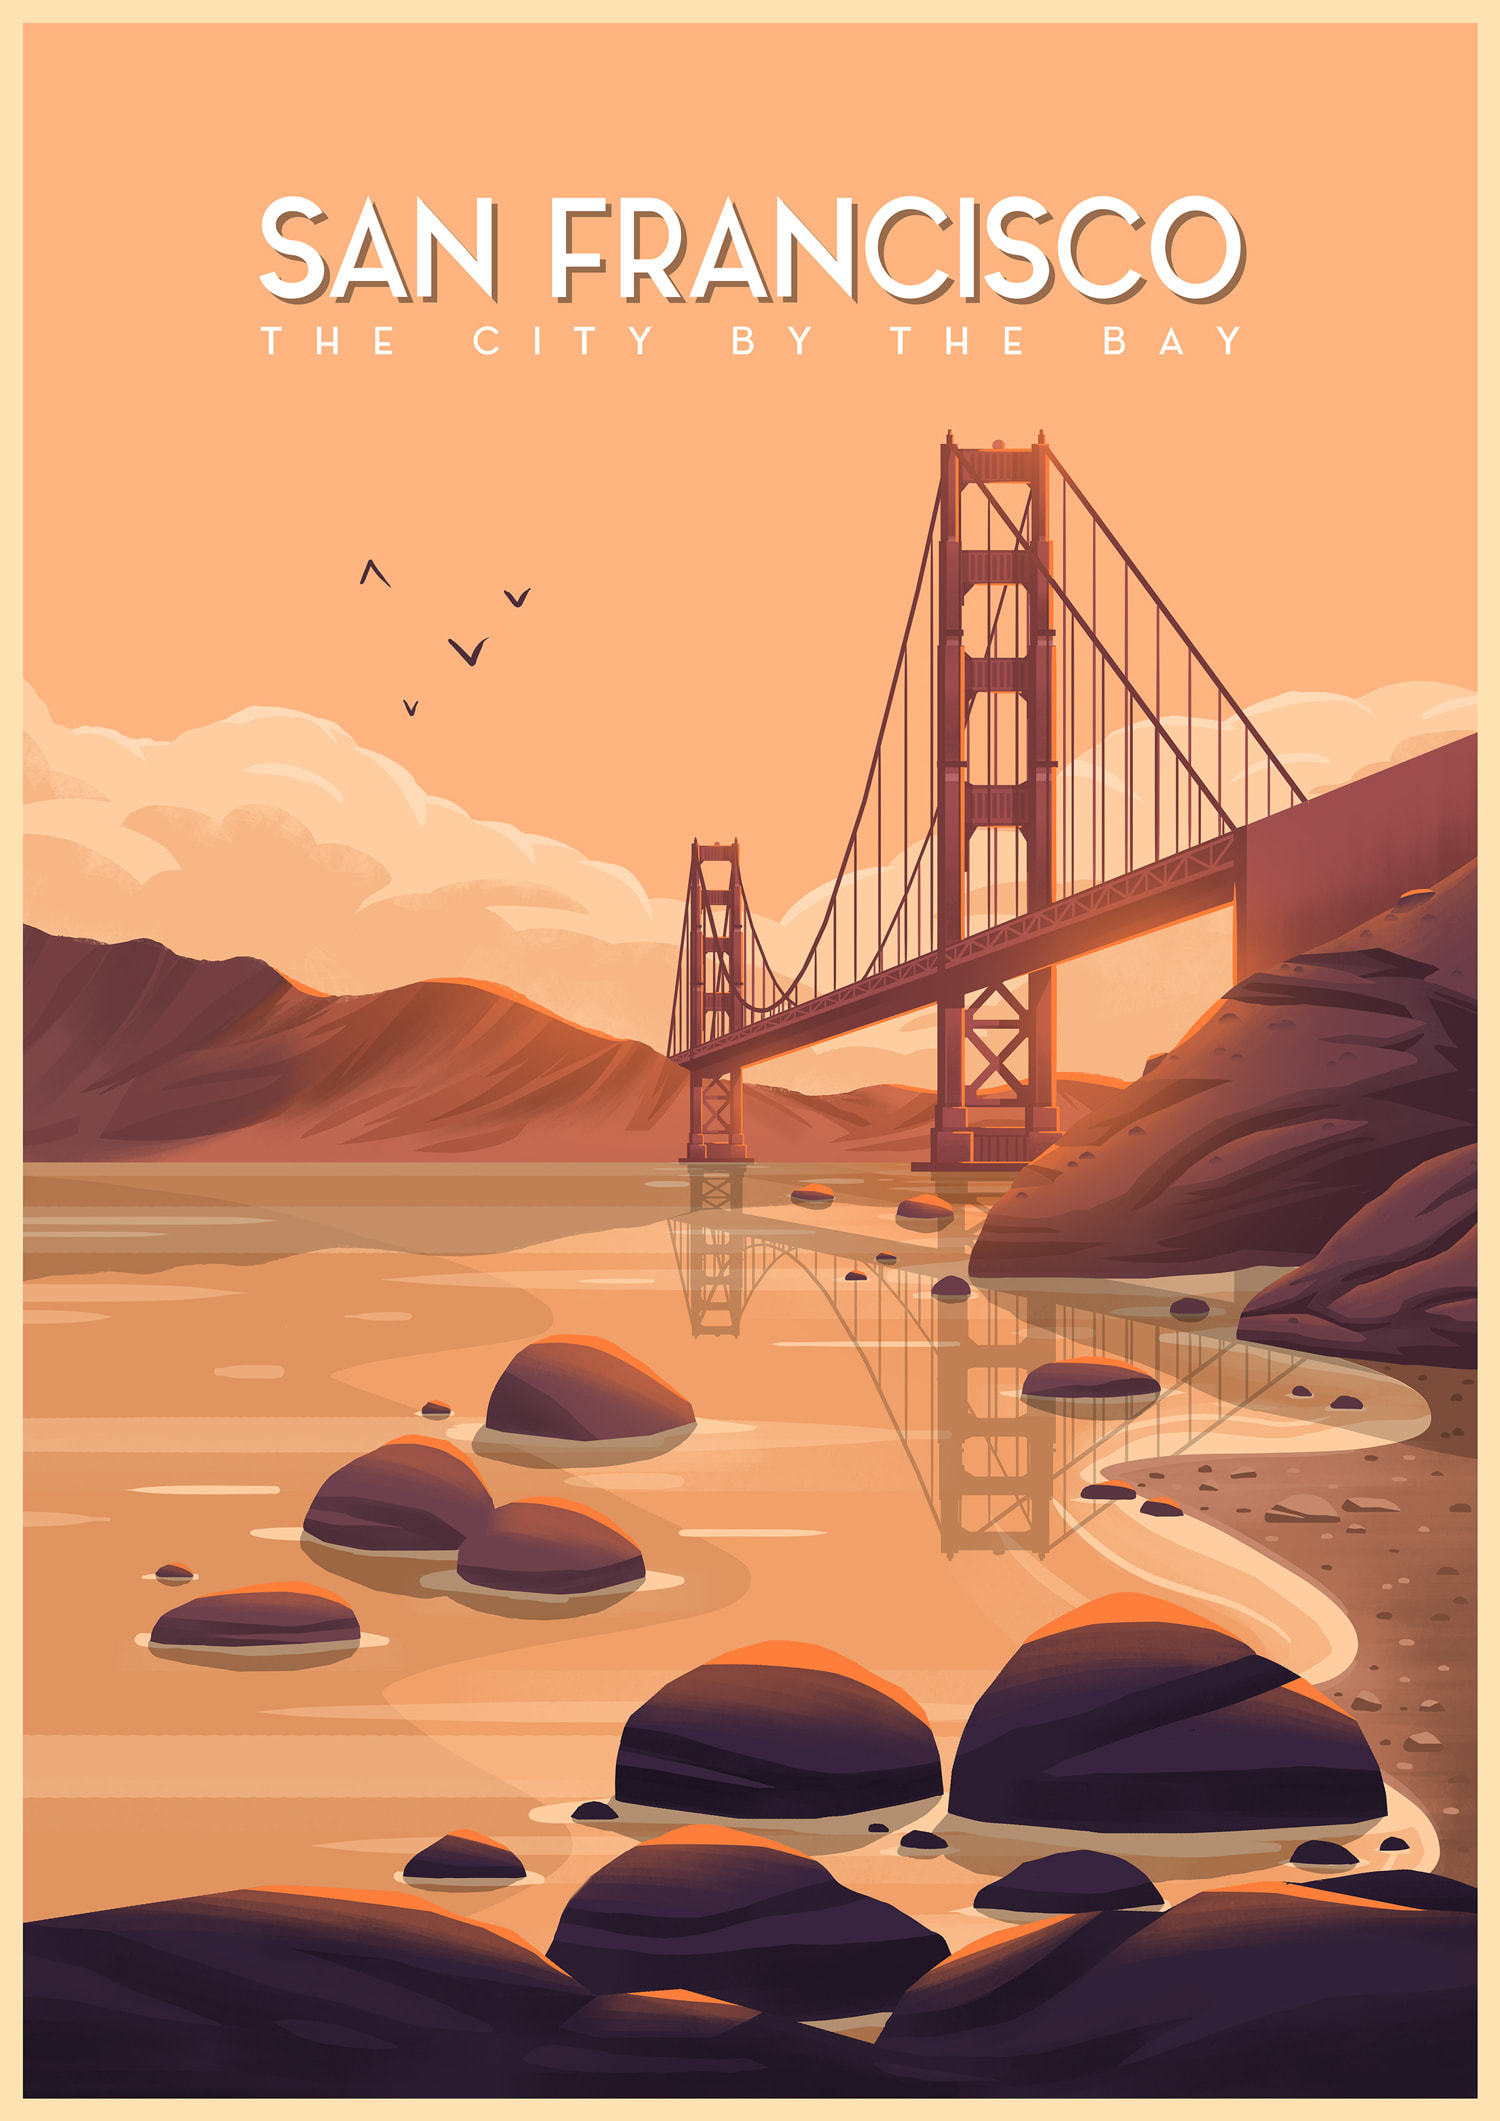 The City by the Bay